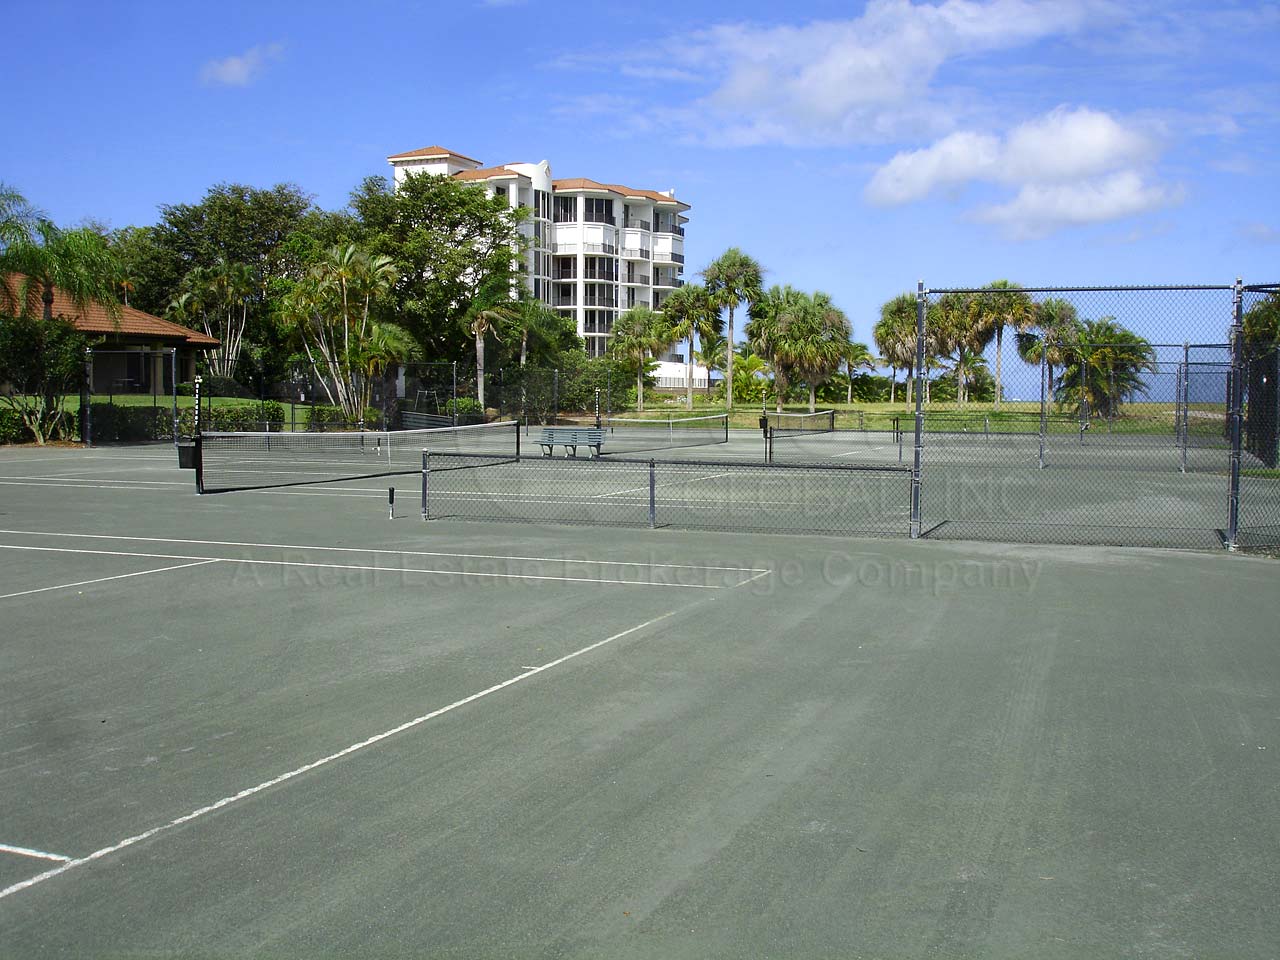 La Peninsula Shared Tennis Courts with Twin Dolphins